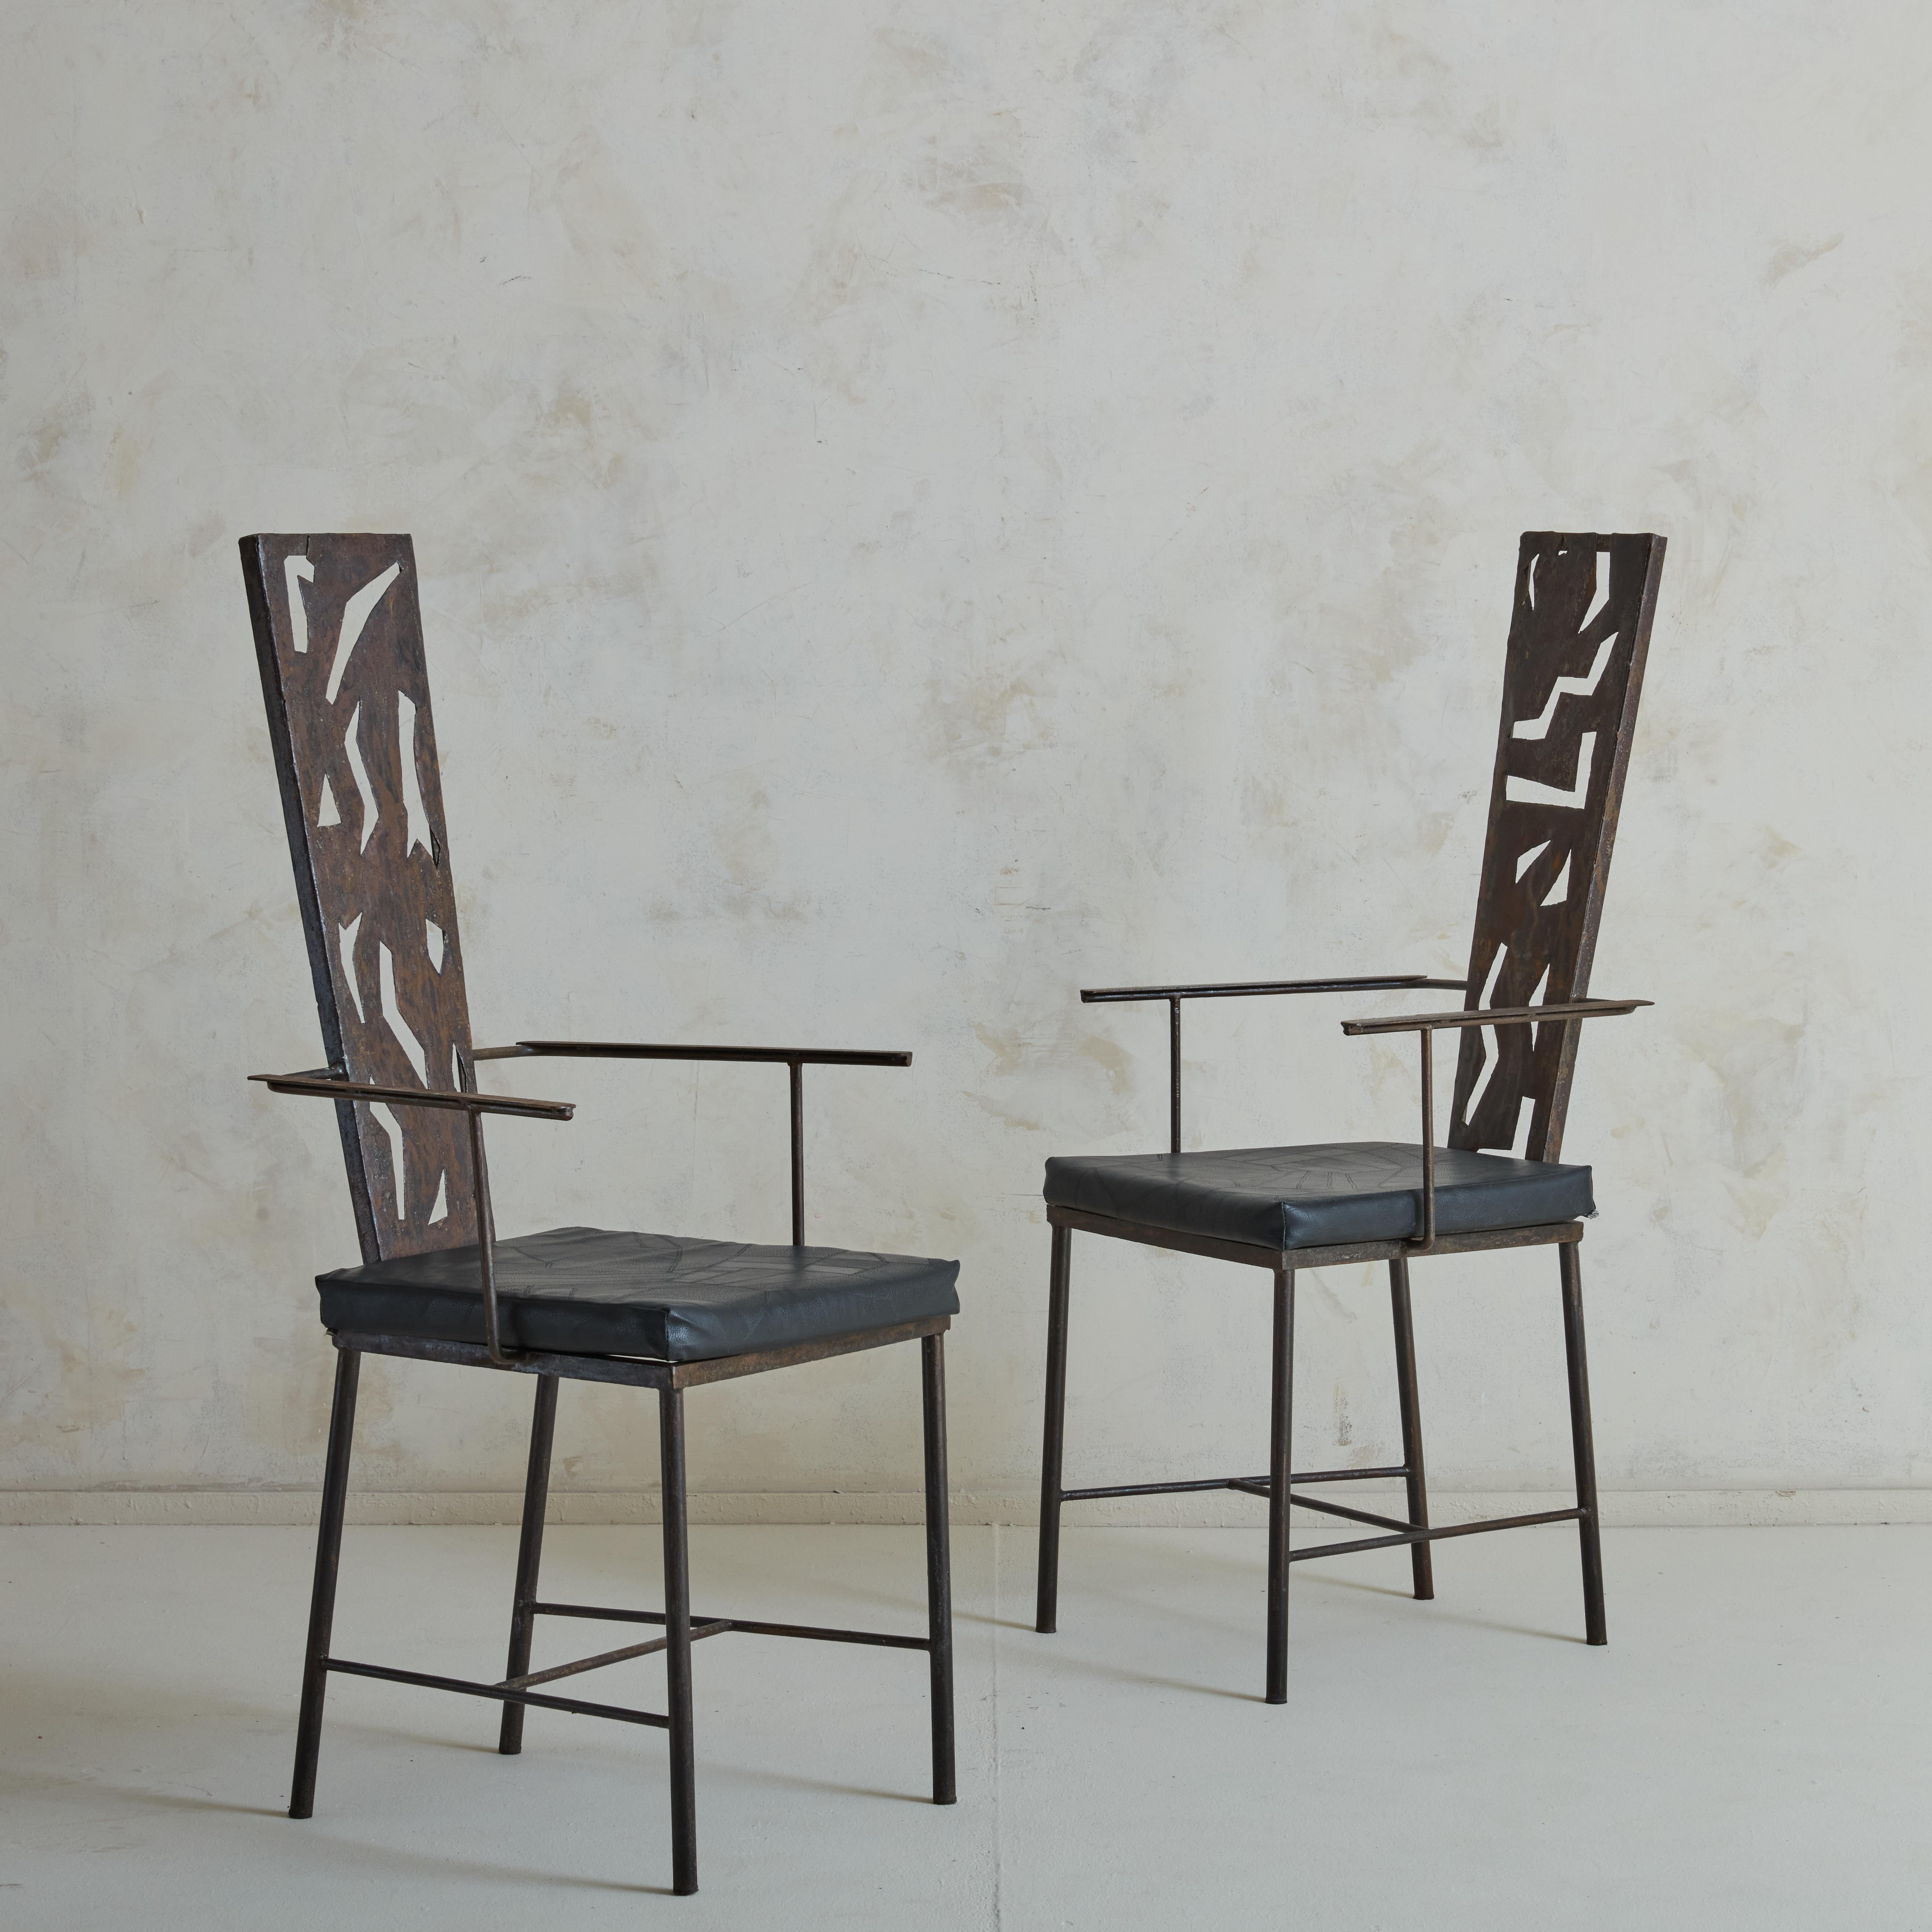 Beautiful set of 6 unique welded iron brutalist chairs, with negative space geometric abstract shapes on the backrest and black leather removable cushion.

Brutalism is an architectural current, born in the 1950s in England, seen as the overcoming